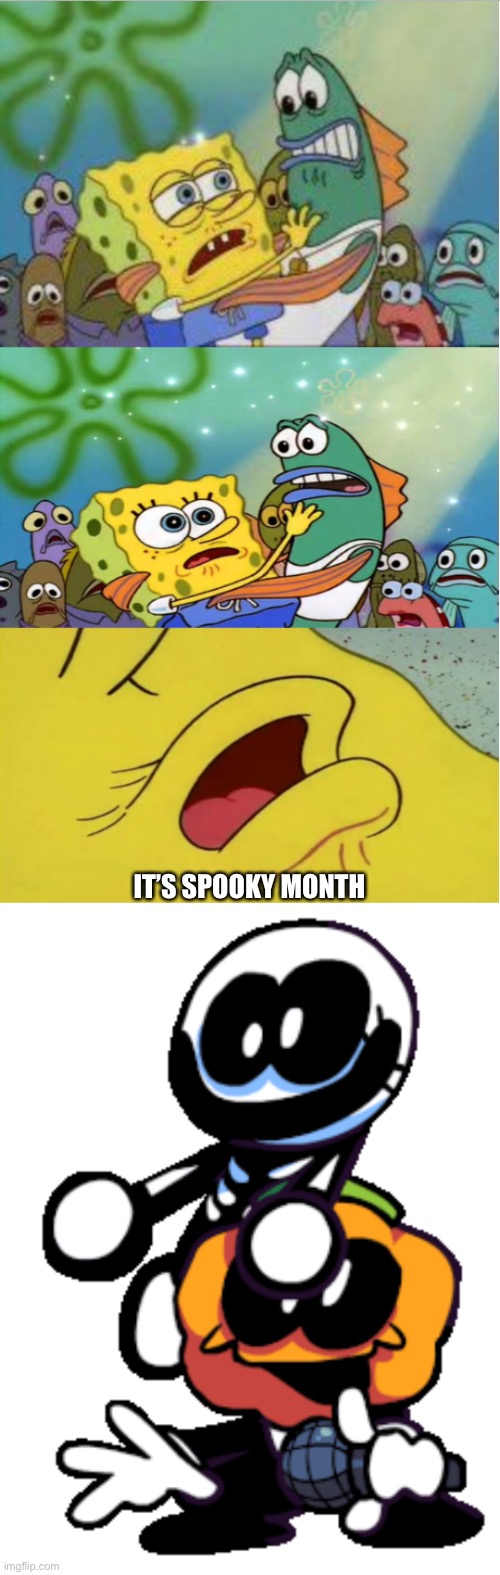 IT’S SPOOKY MONTH | image tagged in closer spongebob ripped pants,pump and skid friday night funkin | made w/ Imgflip meme maker